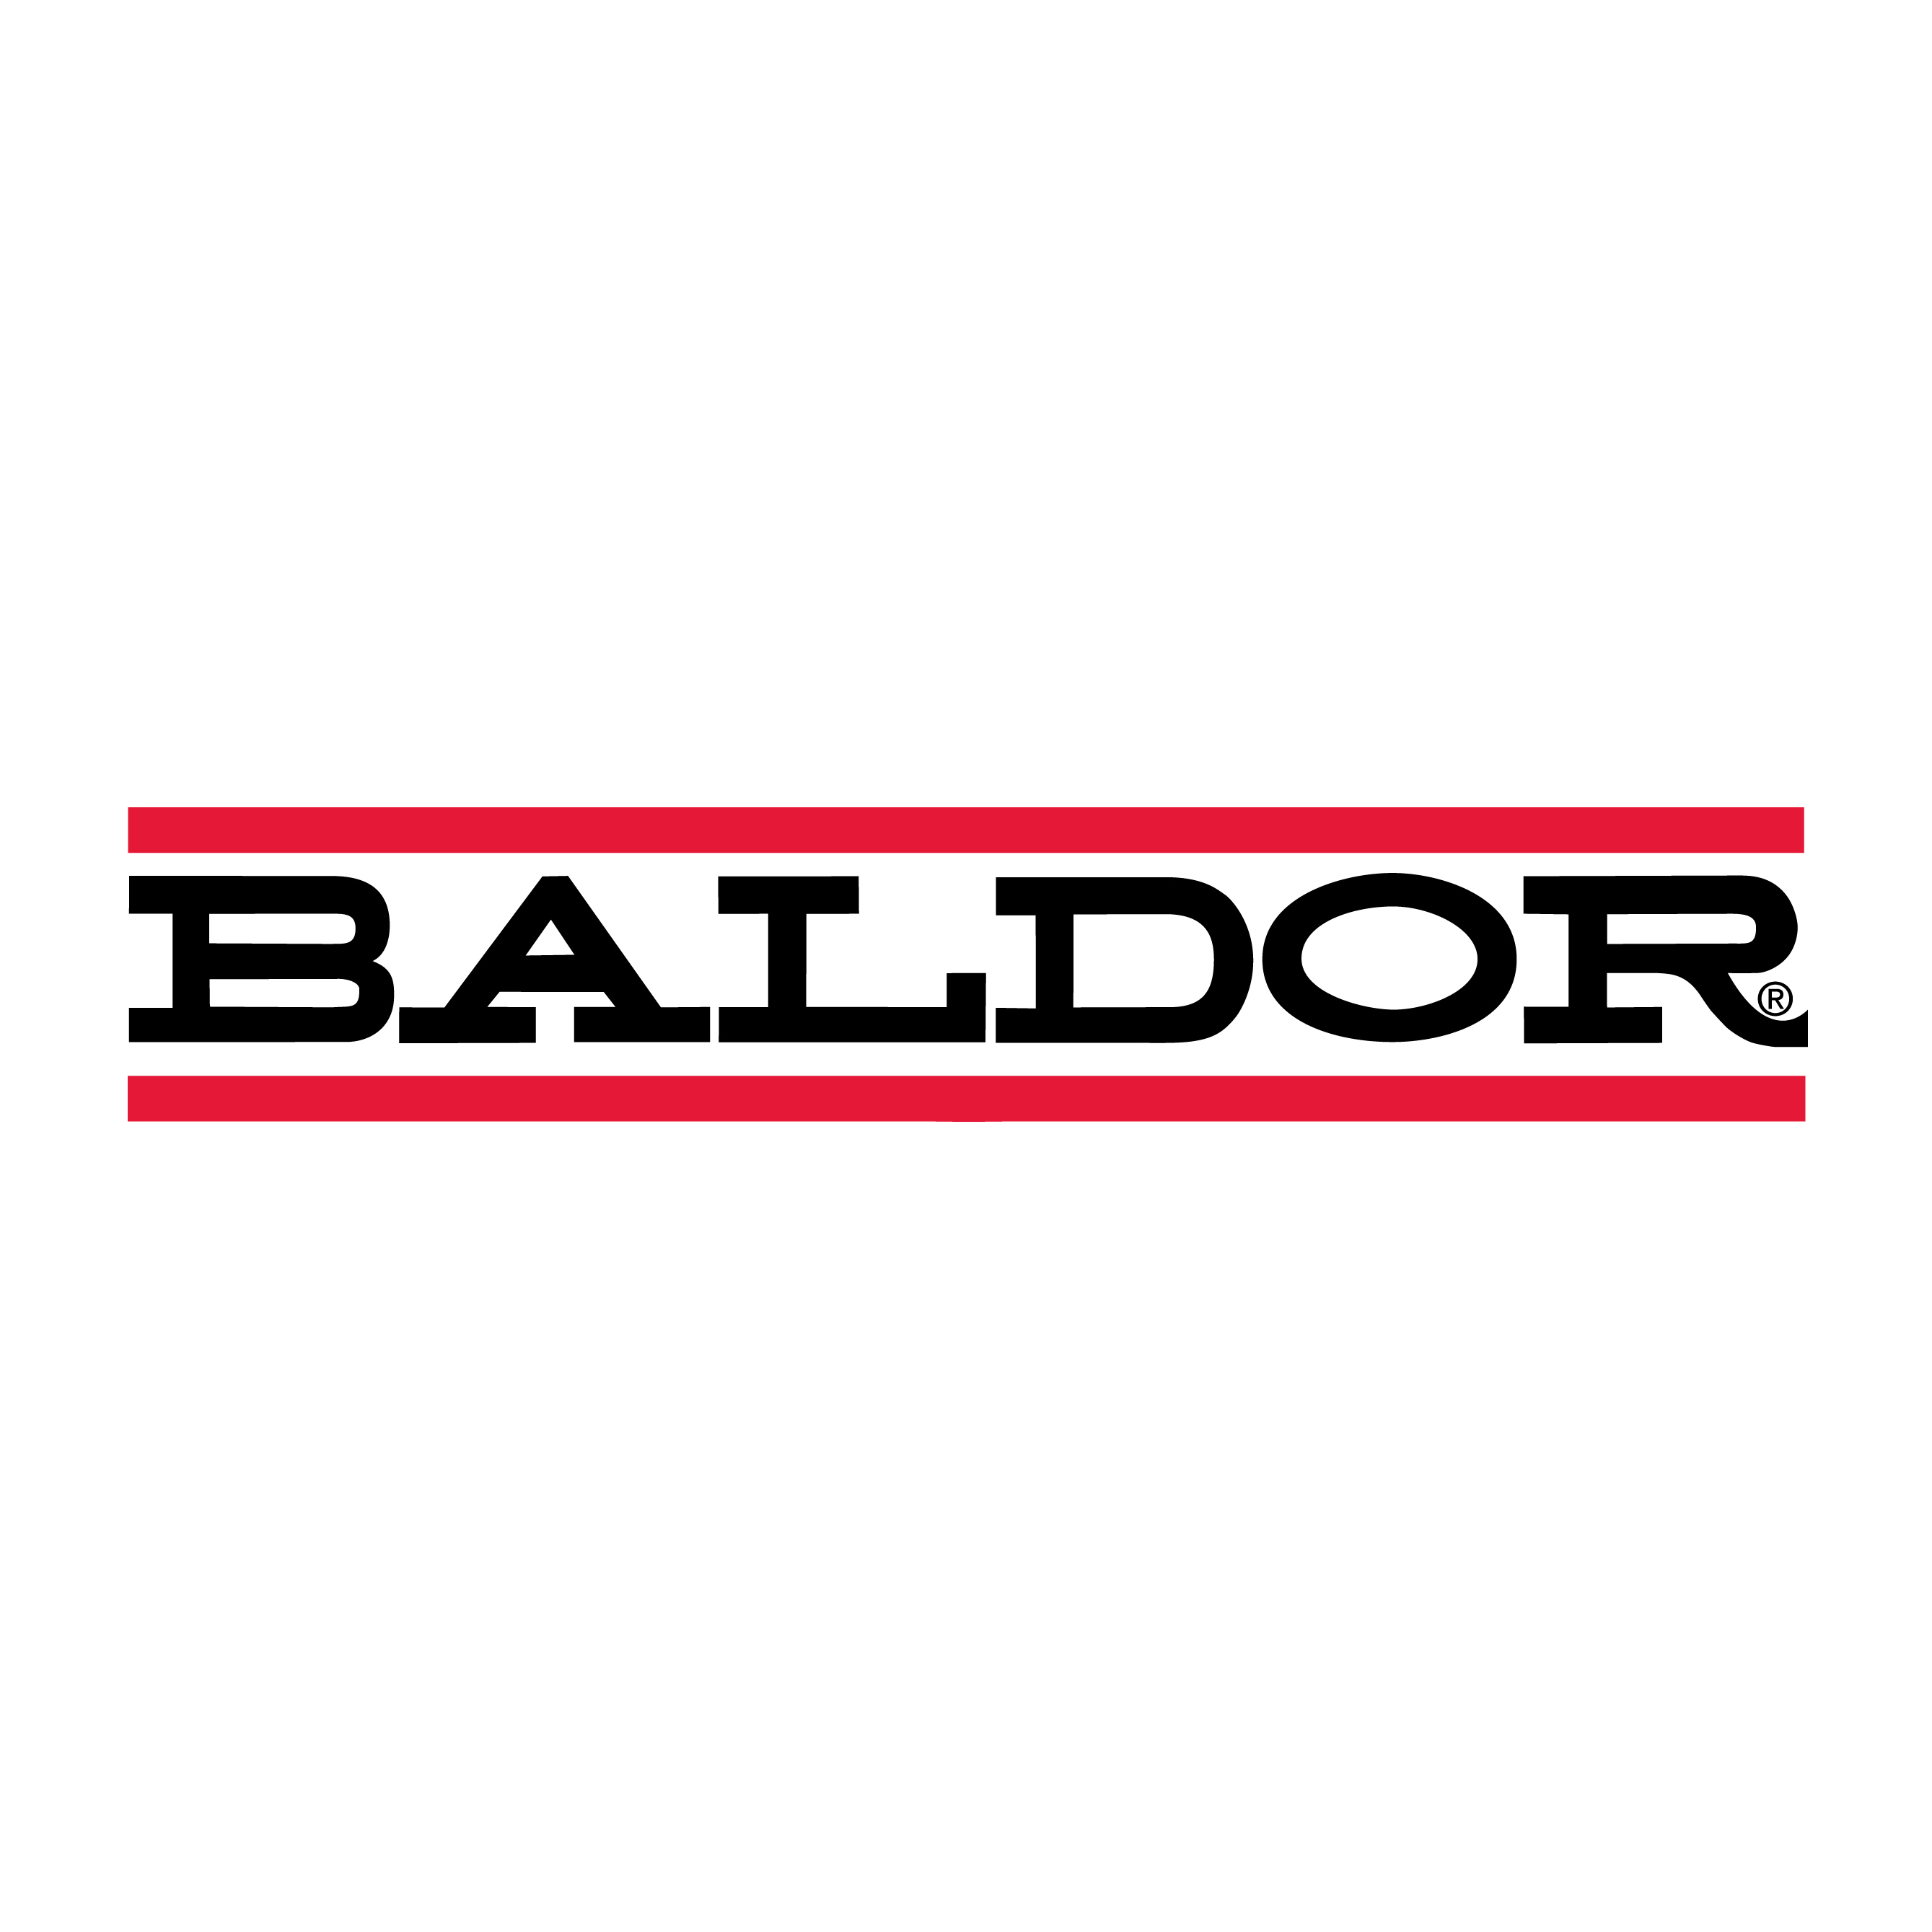 Details about   NEW BALDOR RELIANCE 413412-1A  4134121A SUBMERSIBLE PUMP ELECTRODE FITTING P2595 